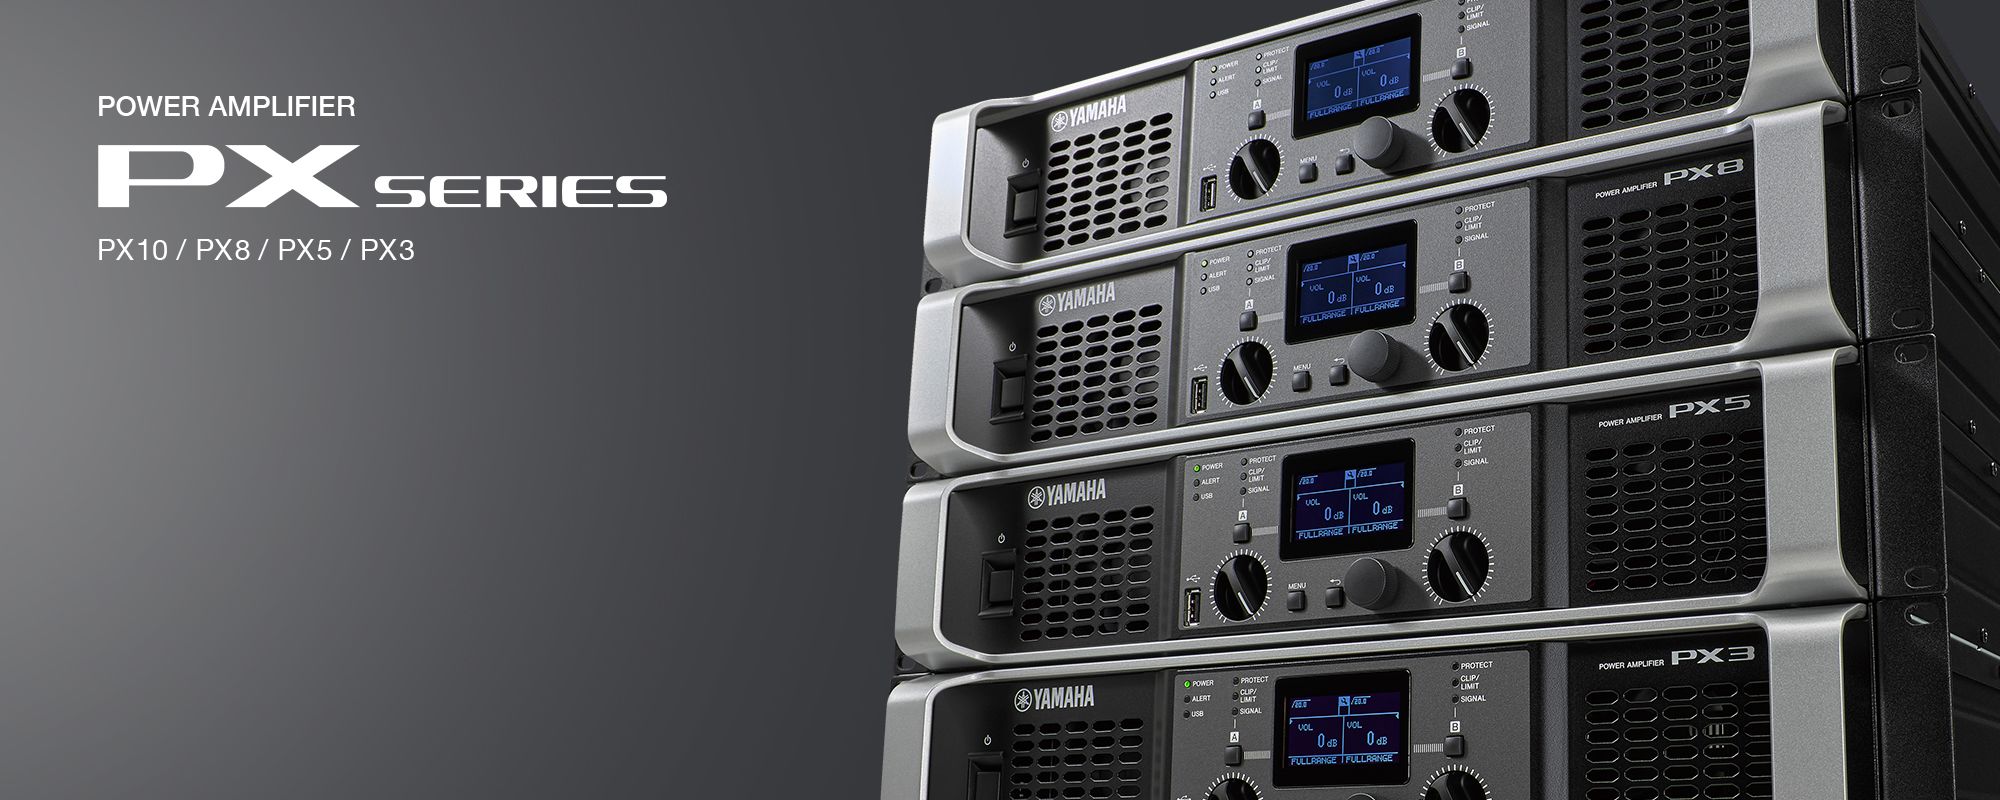 PX Series - Overview - Power Amplifiers - Professional Audio